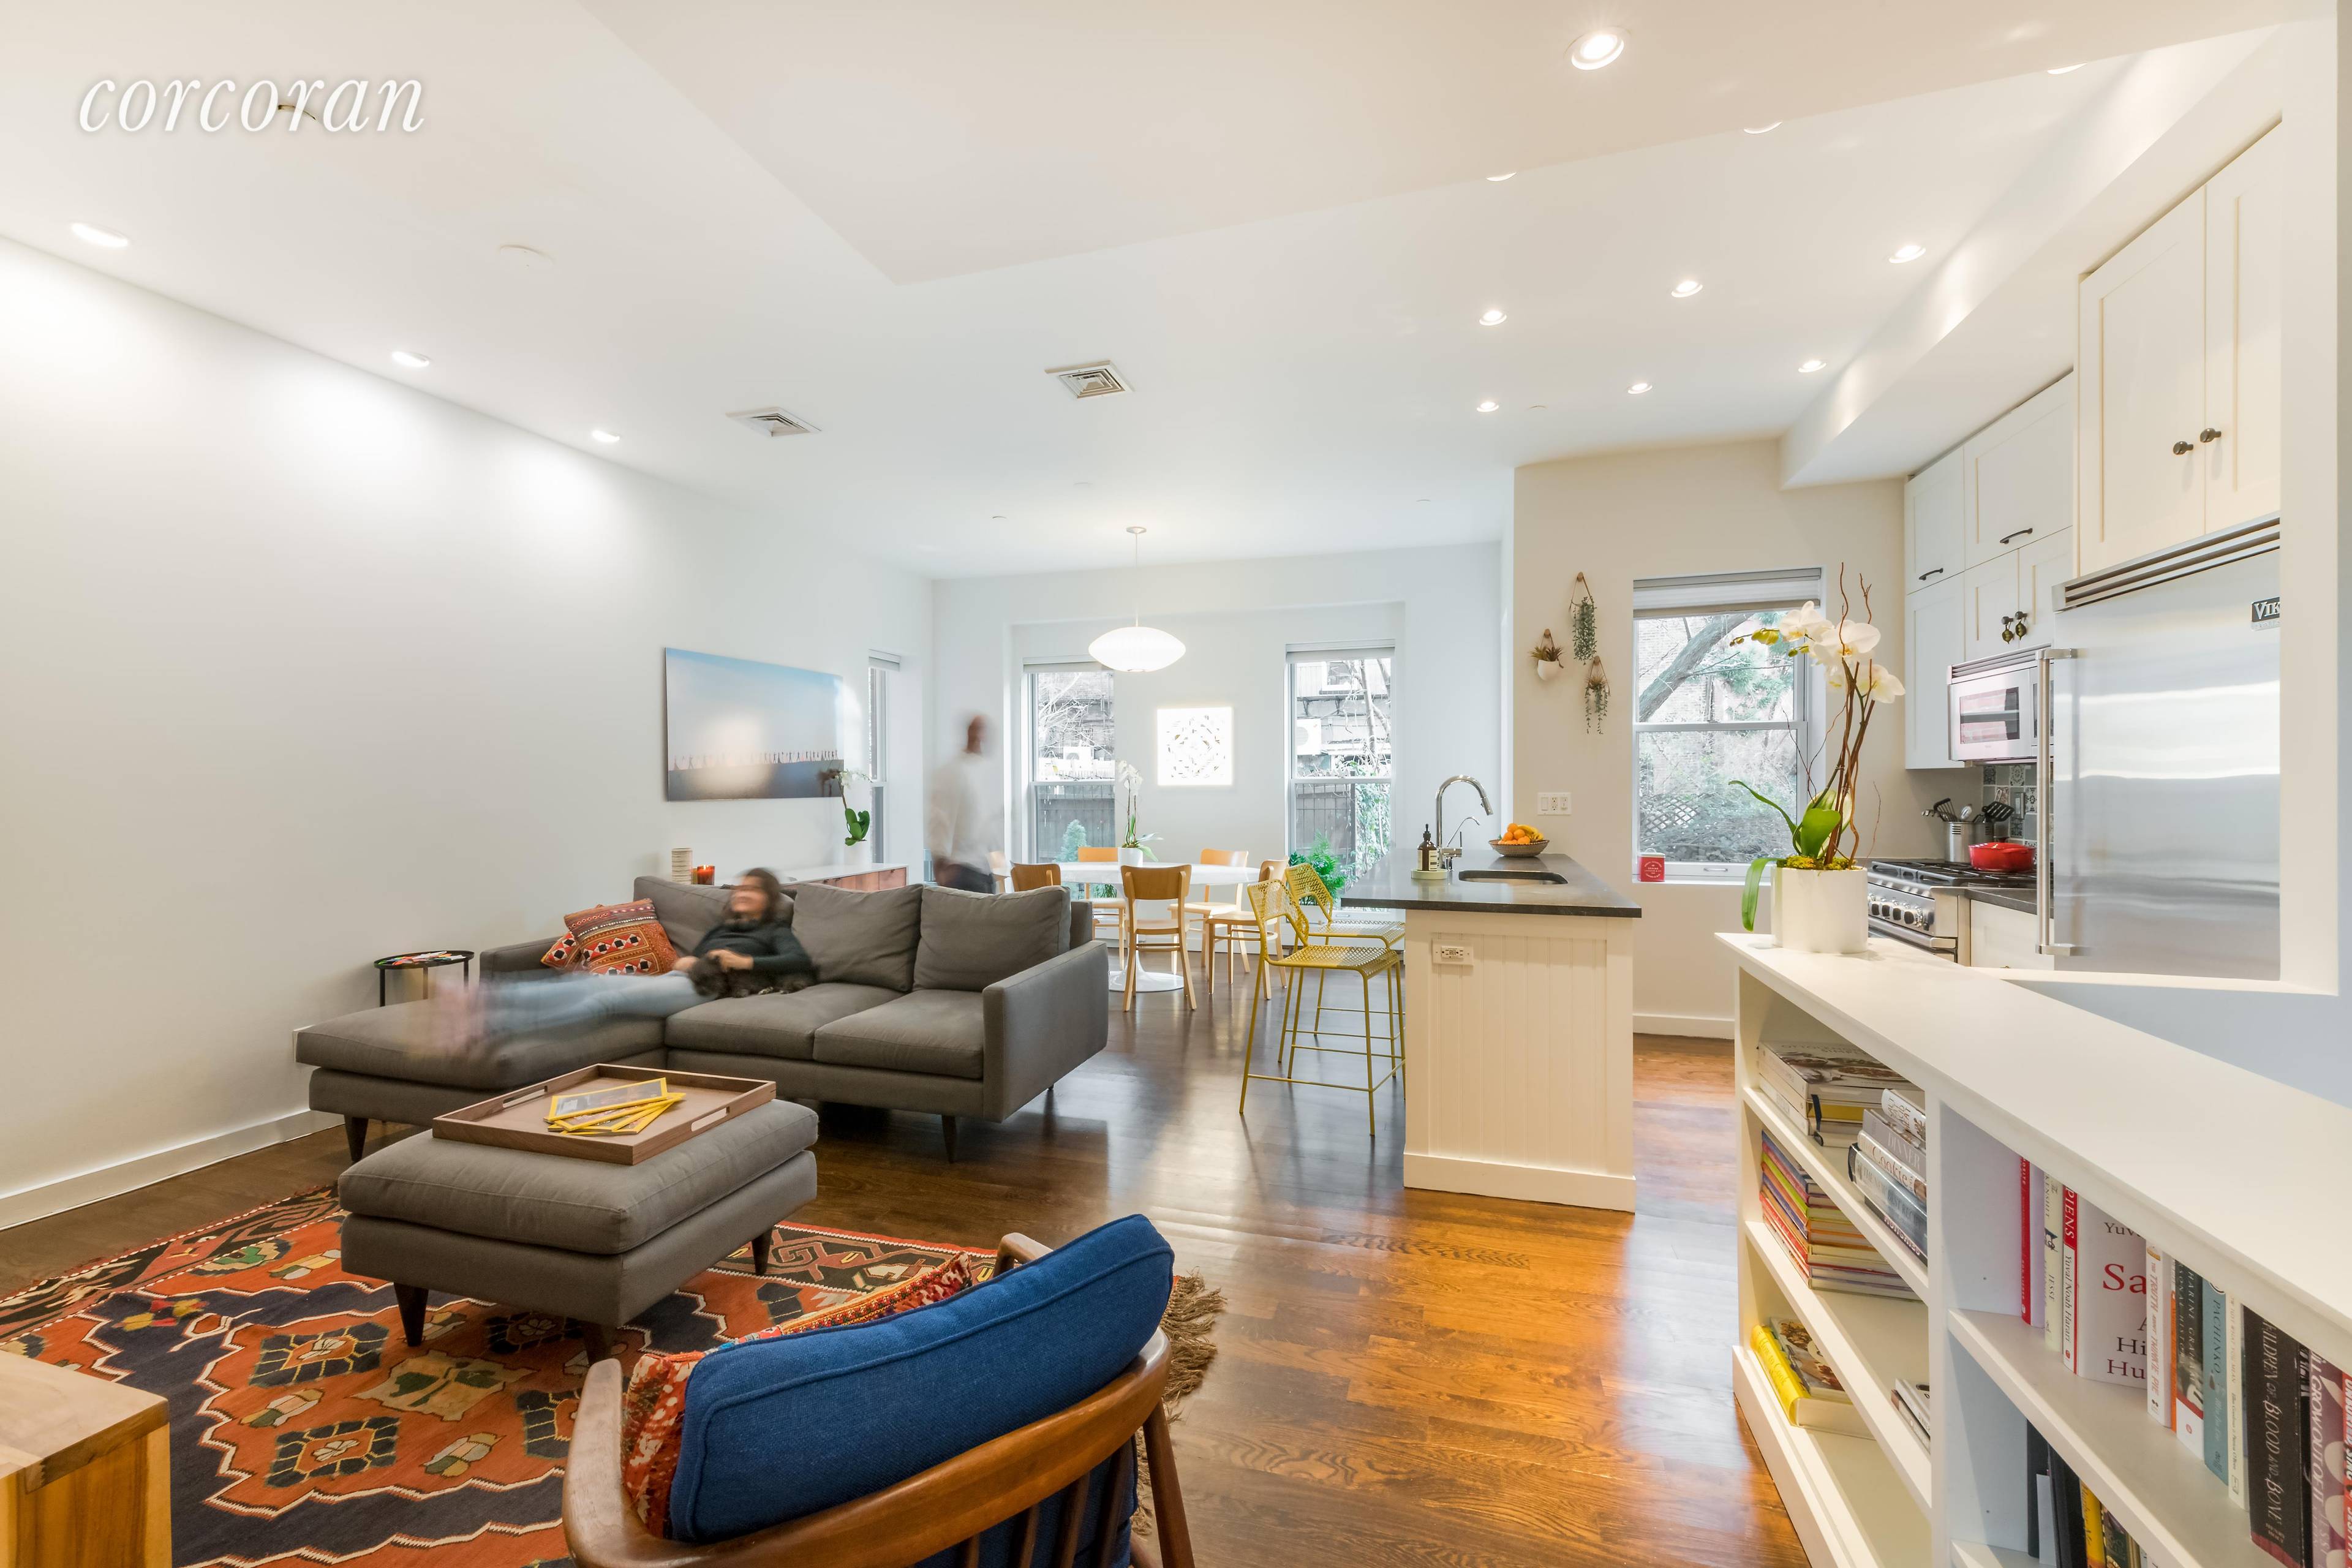 At 1, 554 sqft with three spacious bedrooms and three full baths that sprawl over two floors in a coveted location in the heart of Park Slope near all, its ...